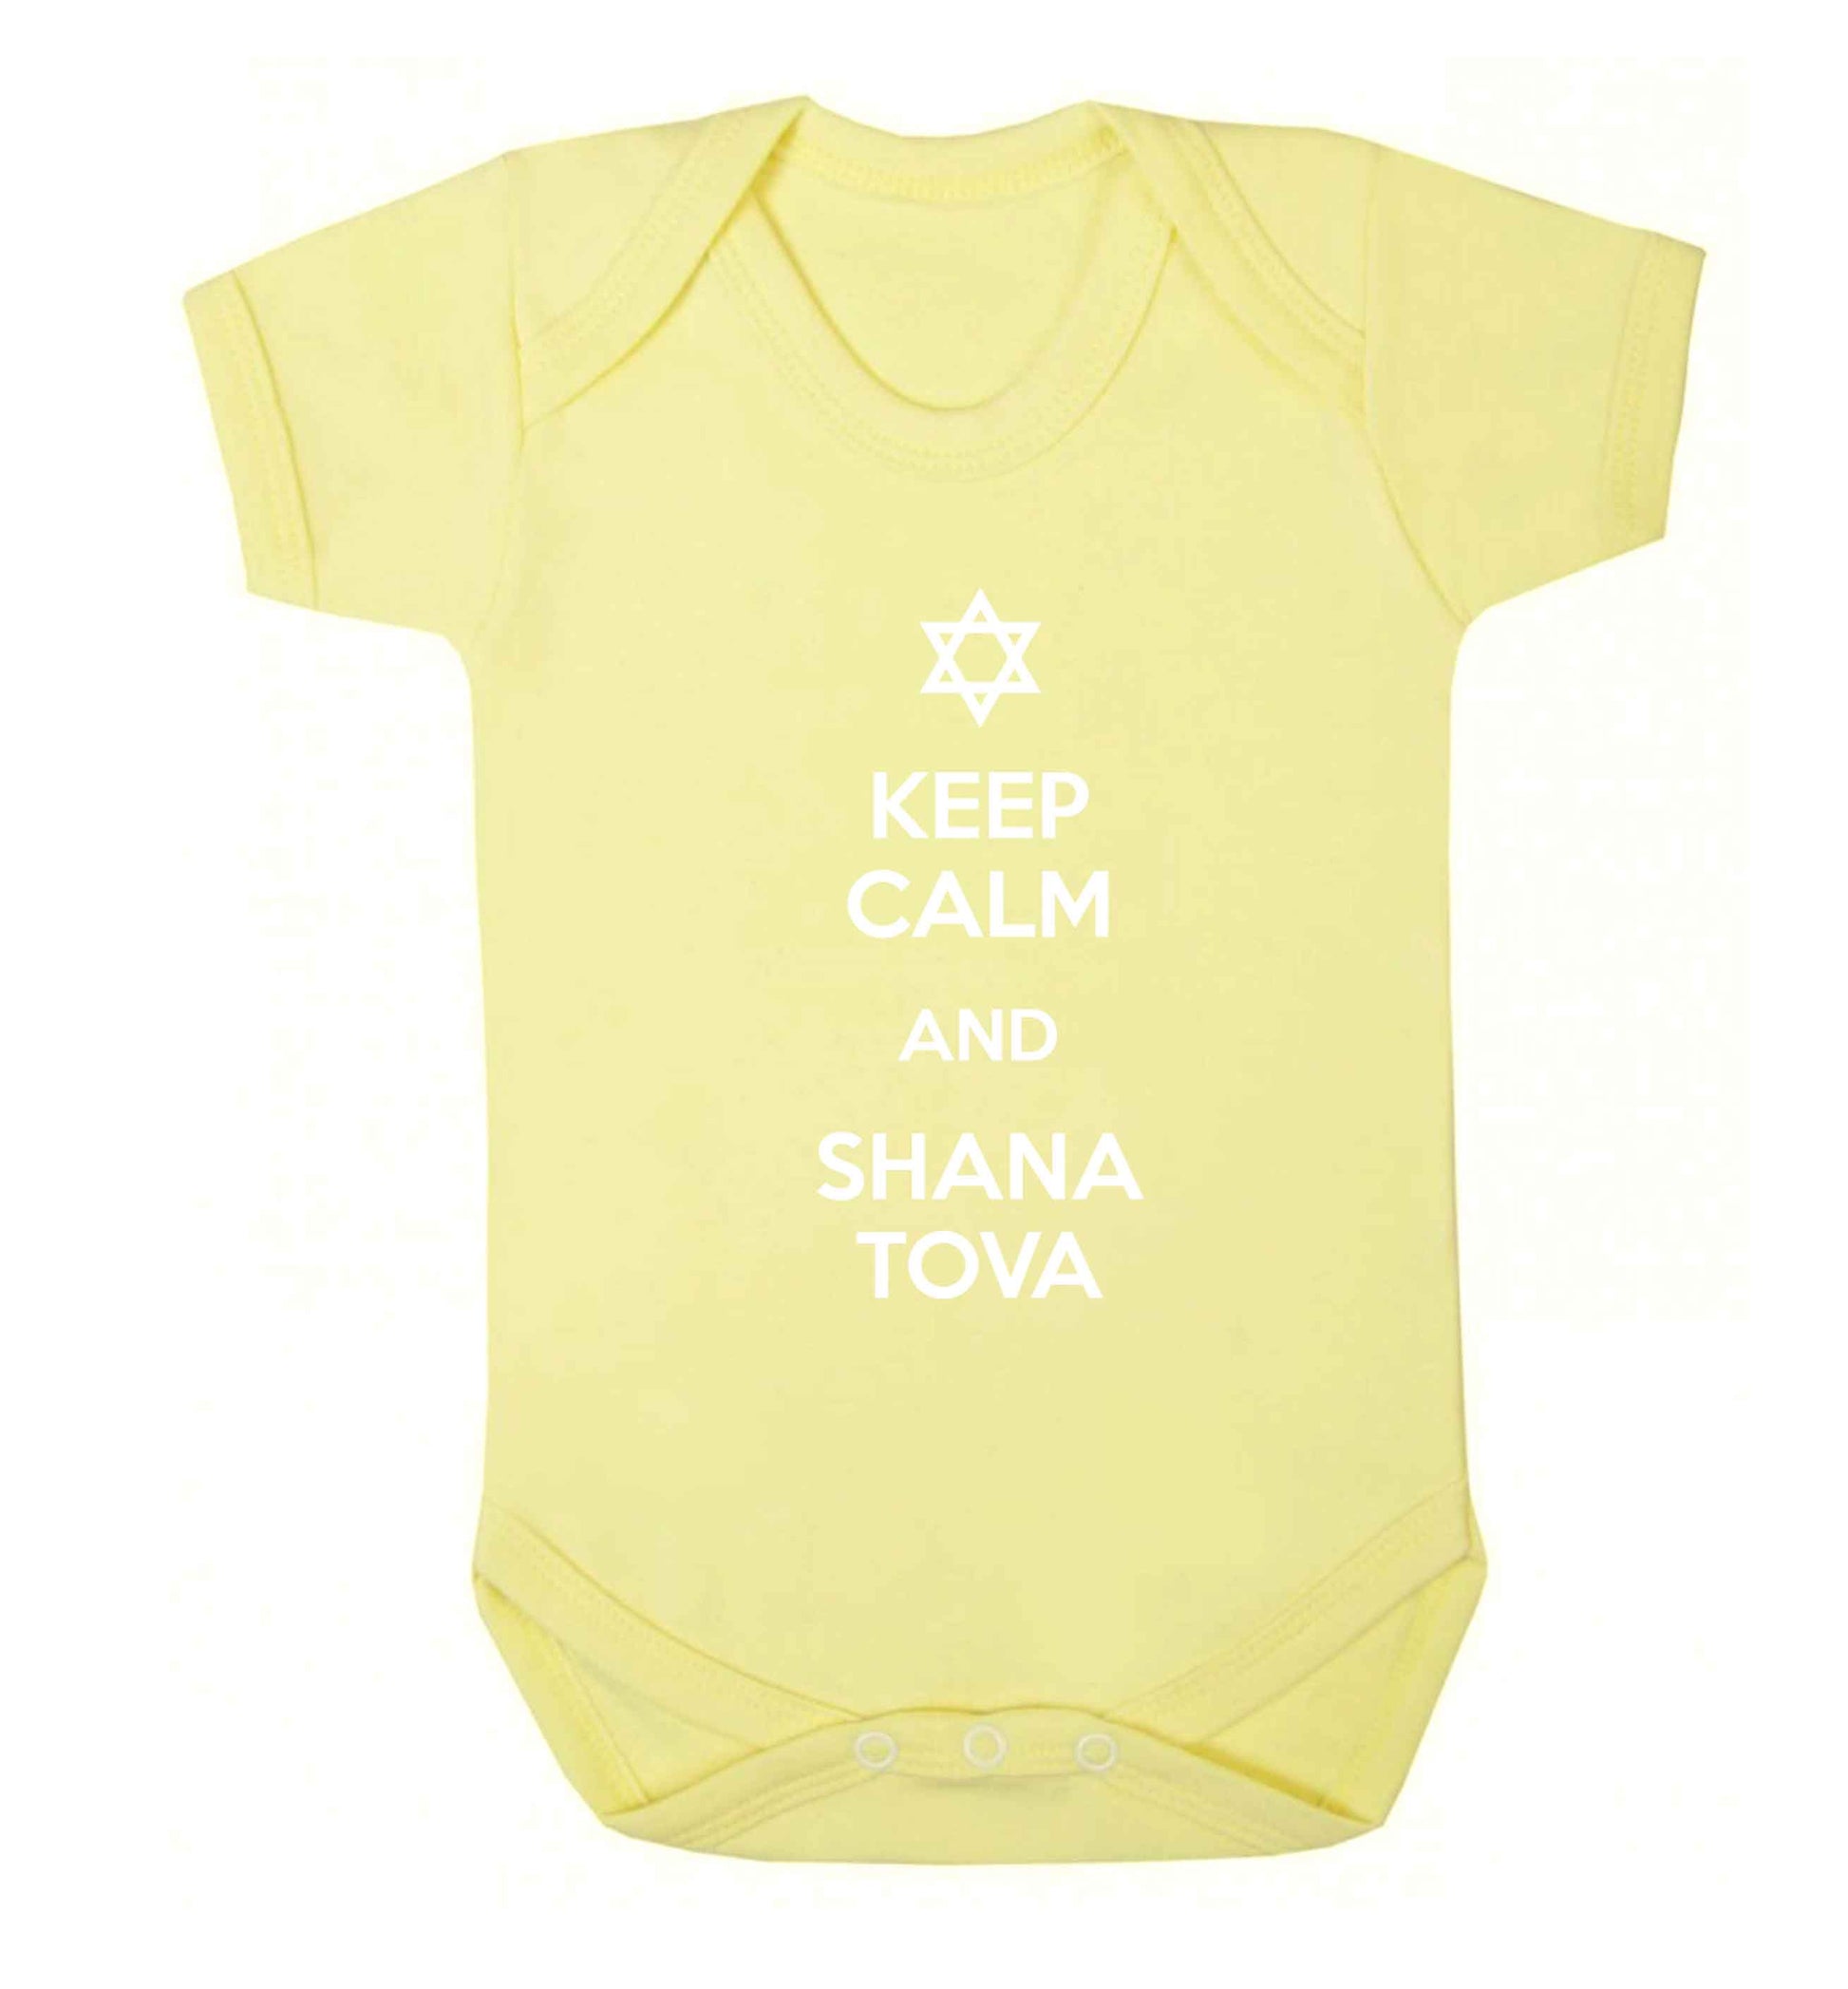 Keep calm and shana tova Baby Vest pale yellow 18-24 months